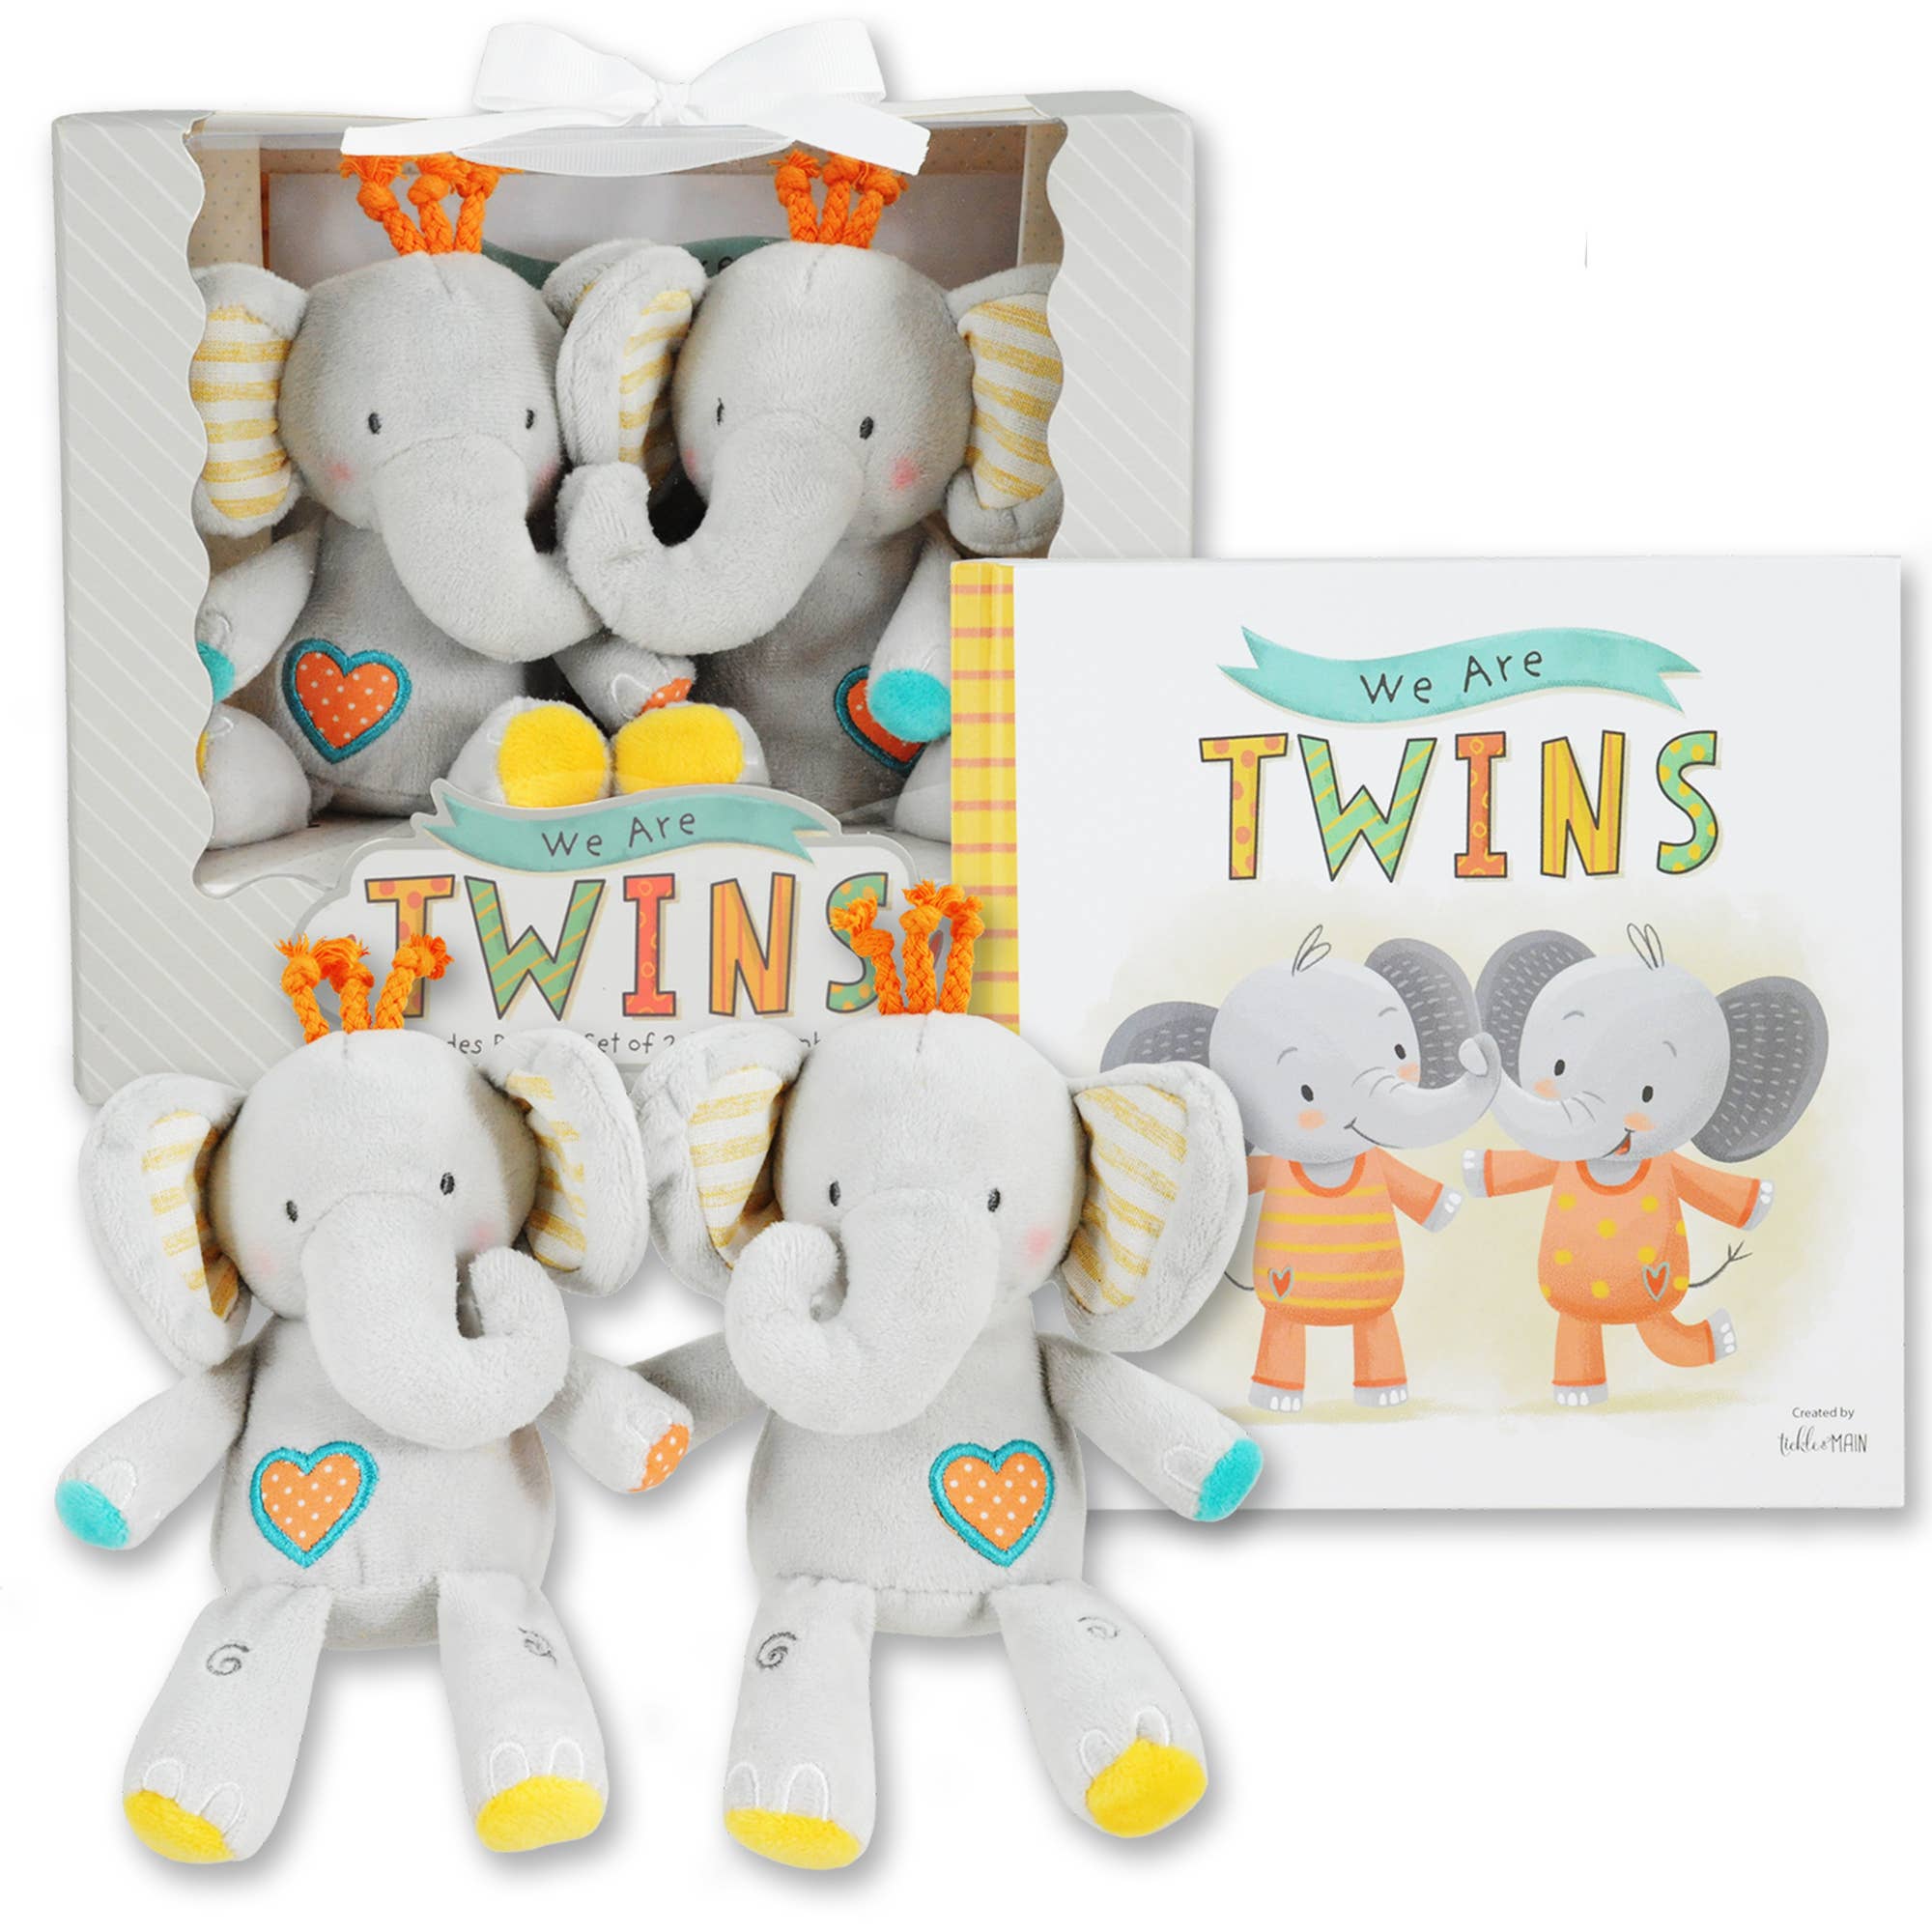 Bearington Collection - We are Twins Gift Set w/ Book and 2 Plush Elephant Rattles